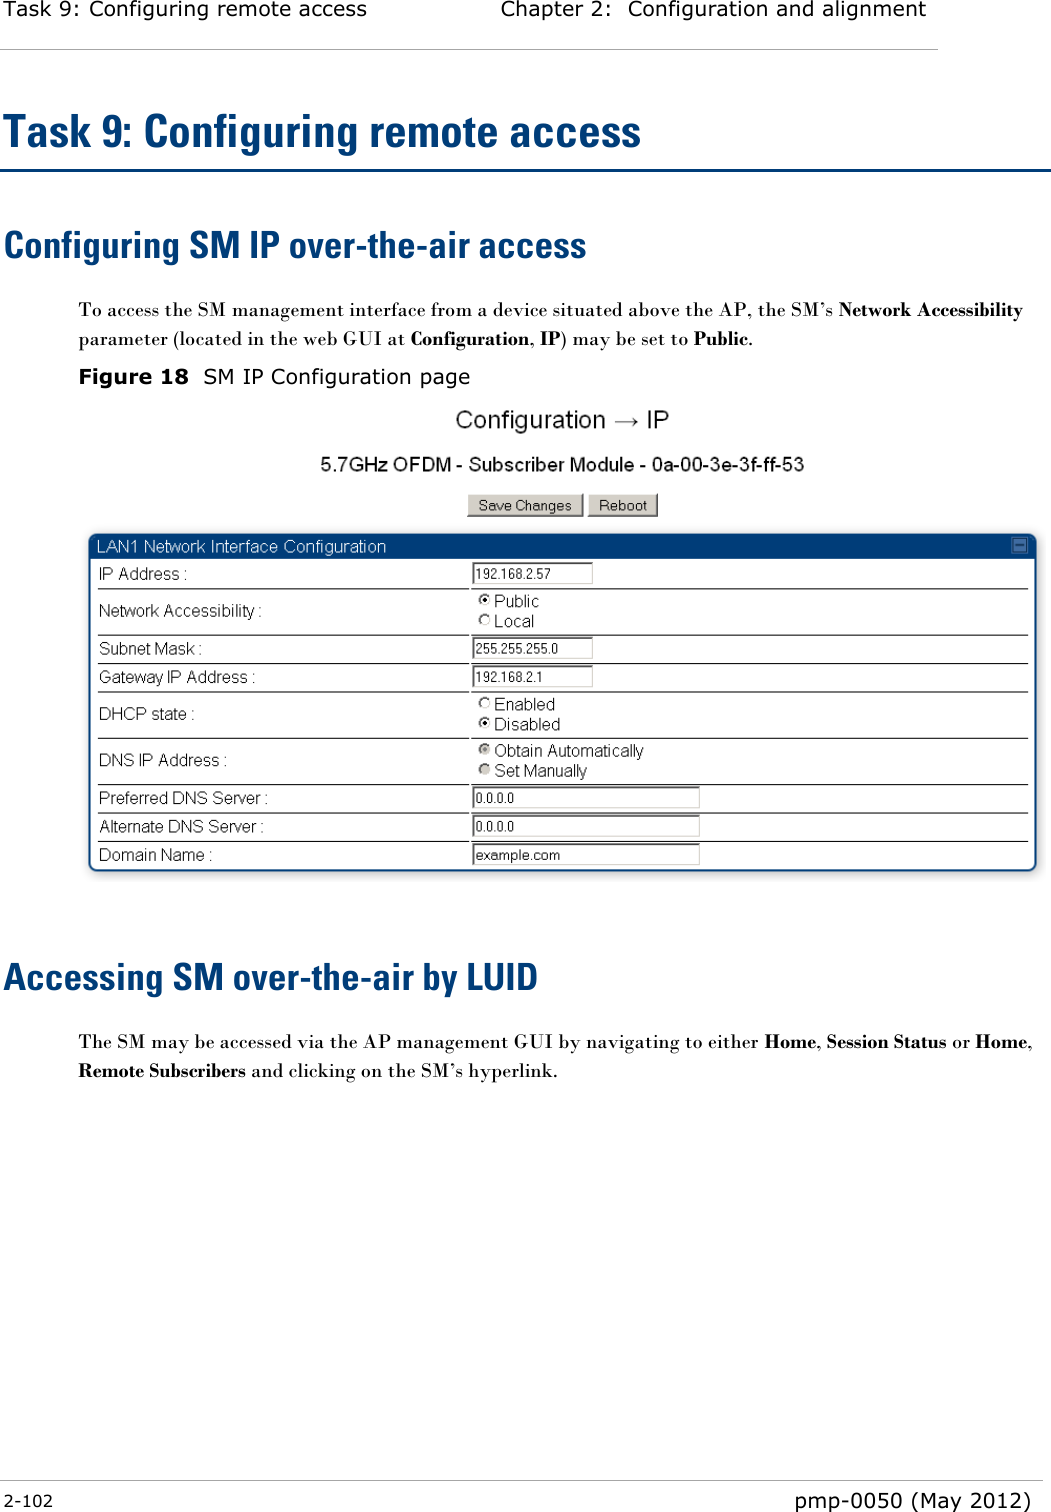 Task 9: Configuring remote access Chapter 2:  Configuration and alignment  2-102  pmp-0050 (May 2012)  Task 9: Configuring remote access Configuring SM IP over-the-air access To access the SM management interface from a device situated above the AP, the SM‘s Network Accessibility parameter (located in the web GUI at Configuration, IP) may be set to Public. Figure 18  SM IP Configuration page   Accessing SM over-the-air by LUID The SM may be accessed via the AP management GUI by navigating to either Home, Session Status or Home, Remote Subscribers and clicking on the SM‘s hyperlink.  